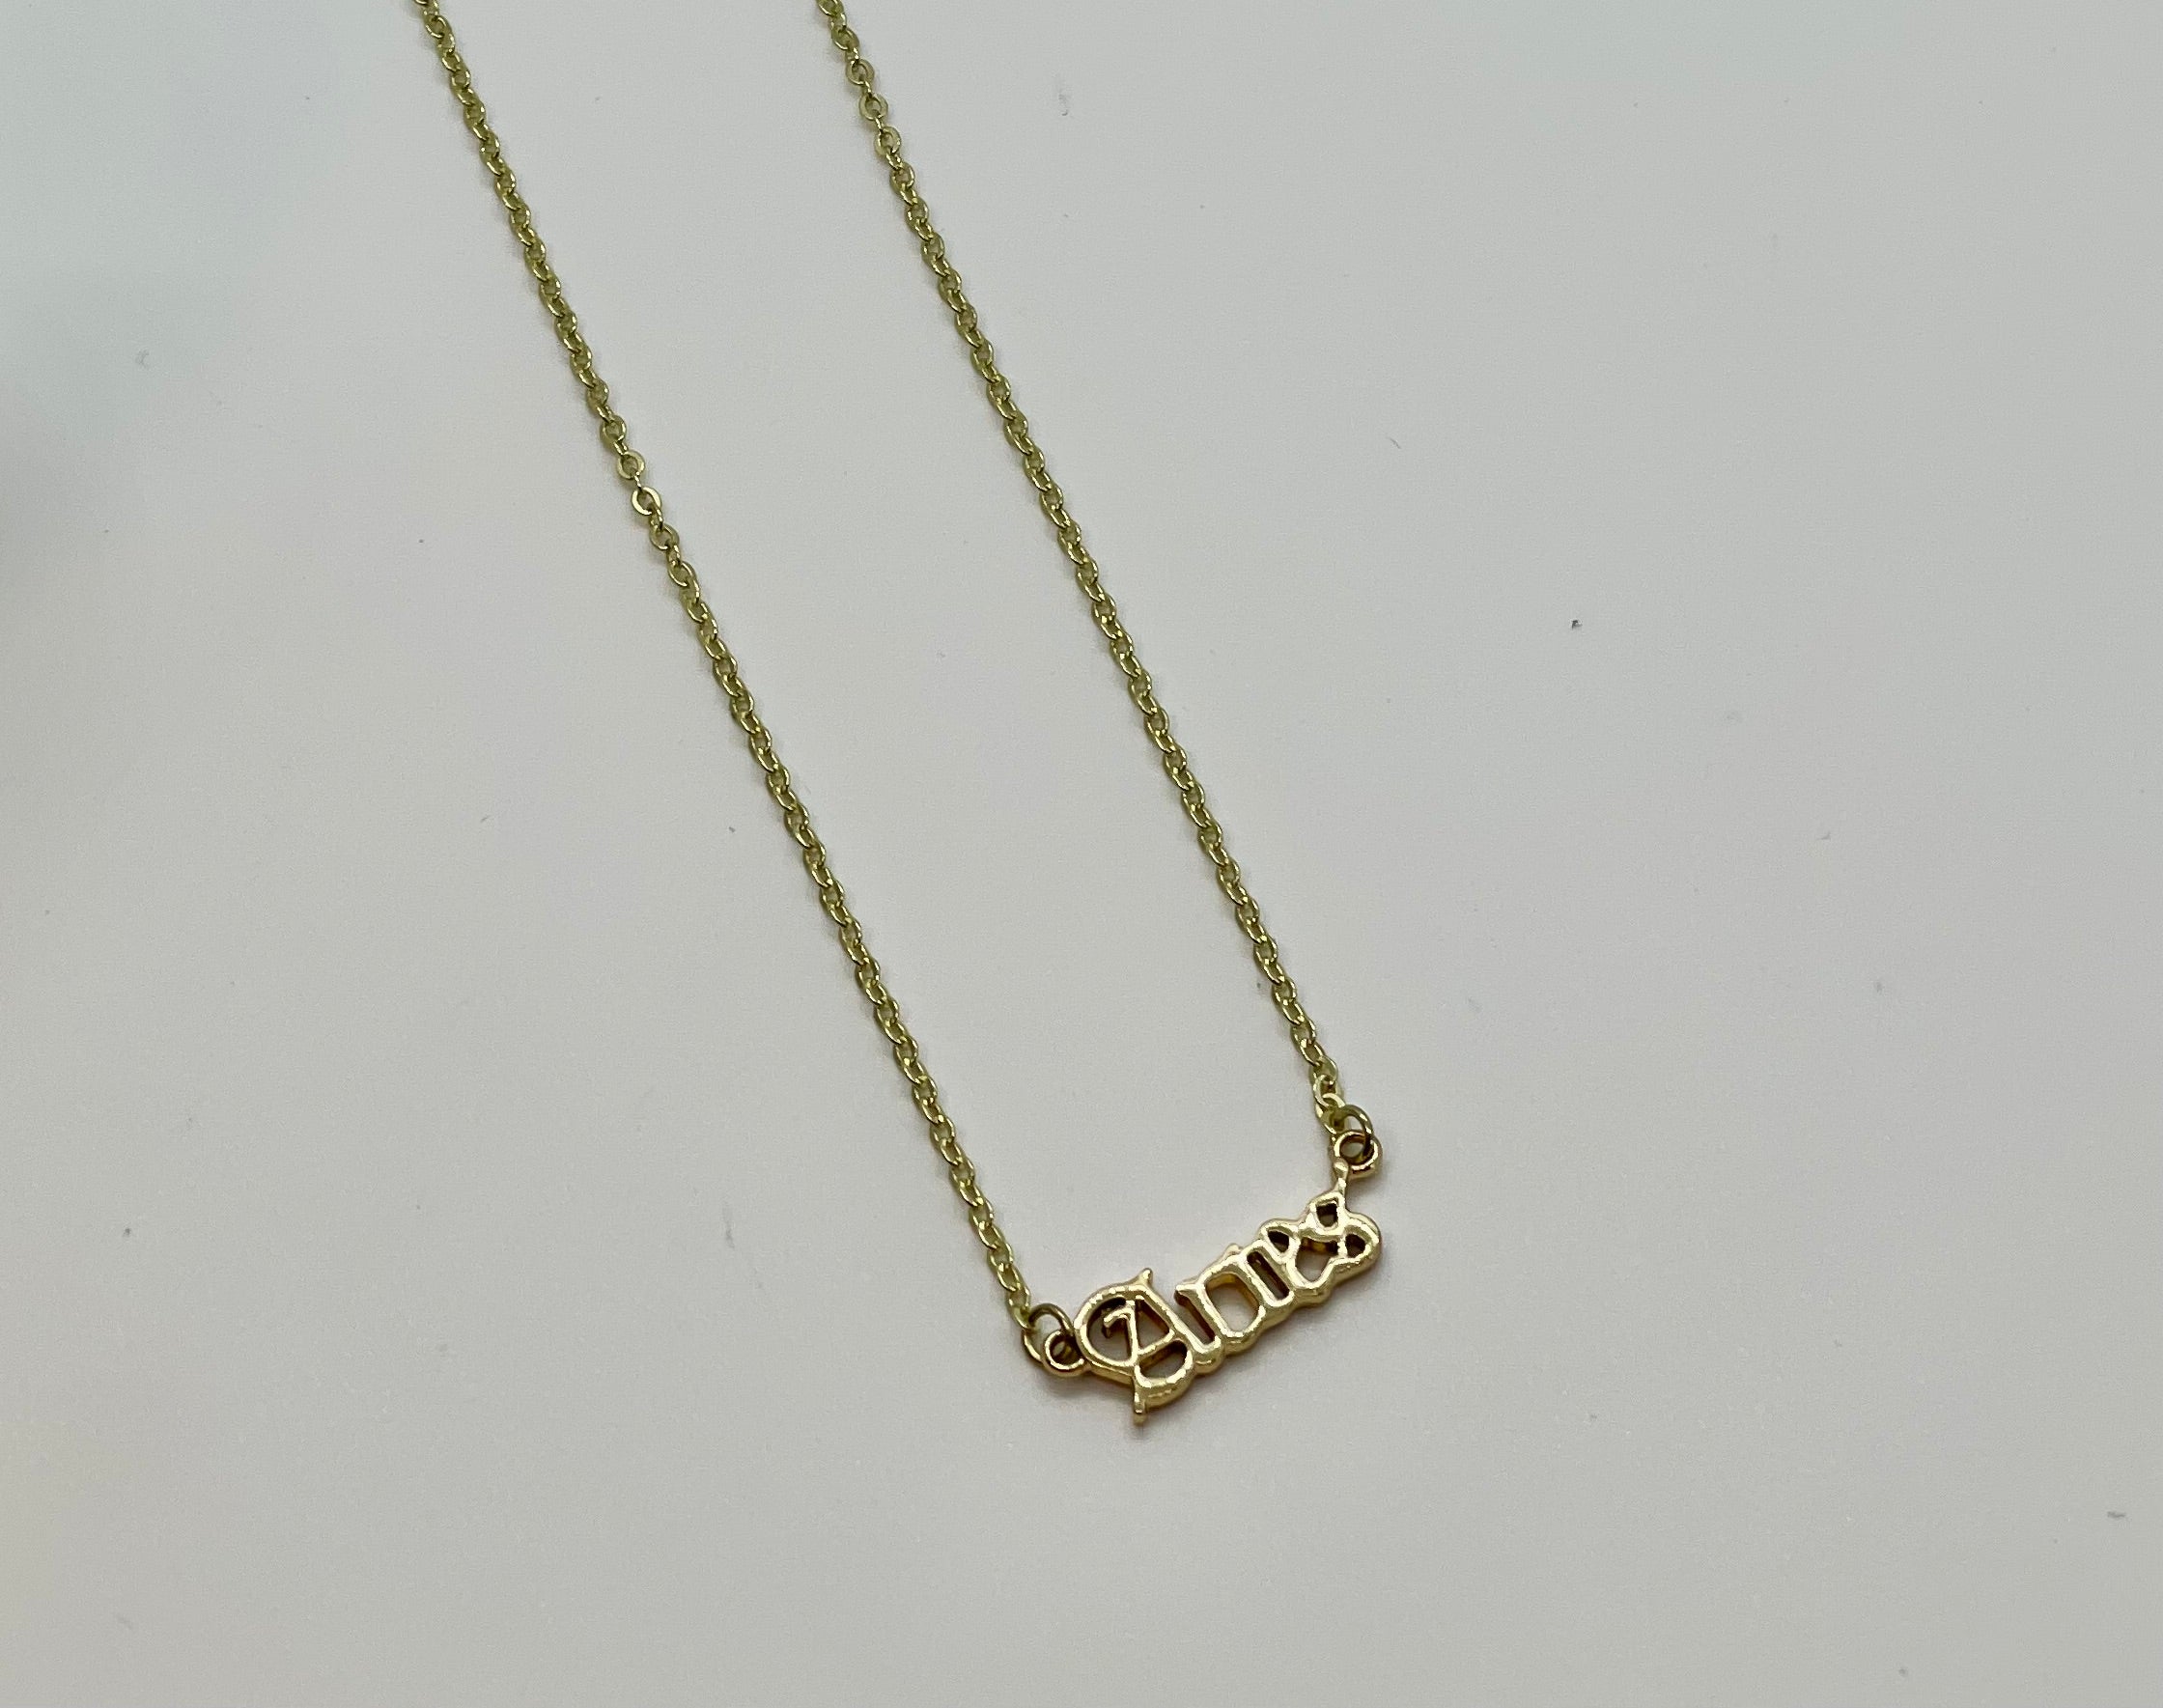 What's Your Sign Zodiac Name Necklace - Bodacious Bijous Aries Gold